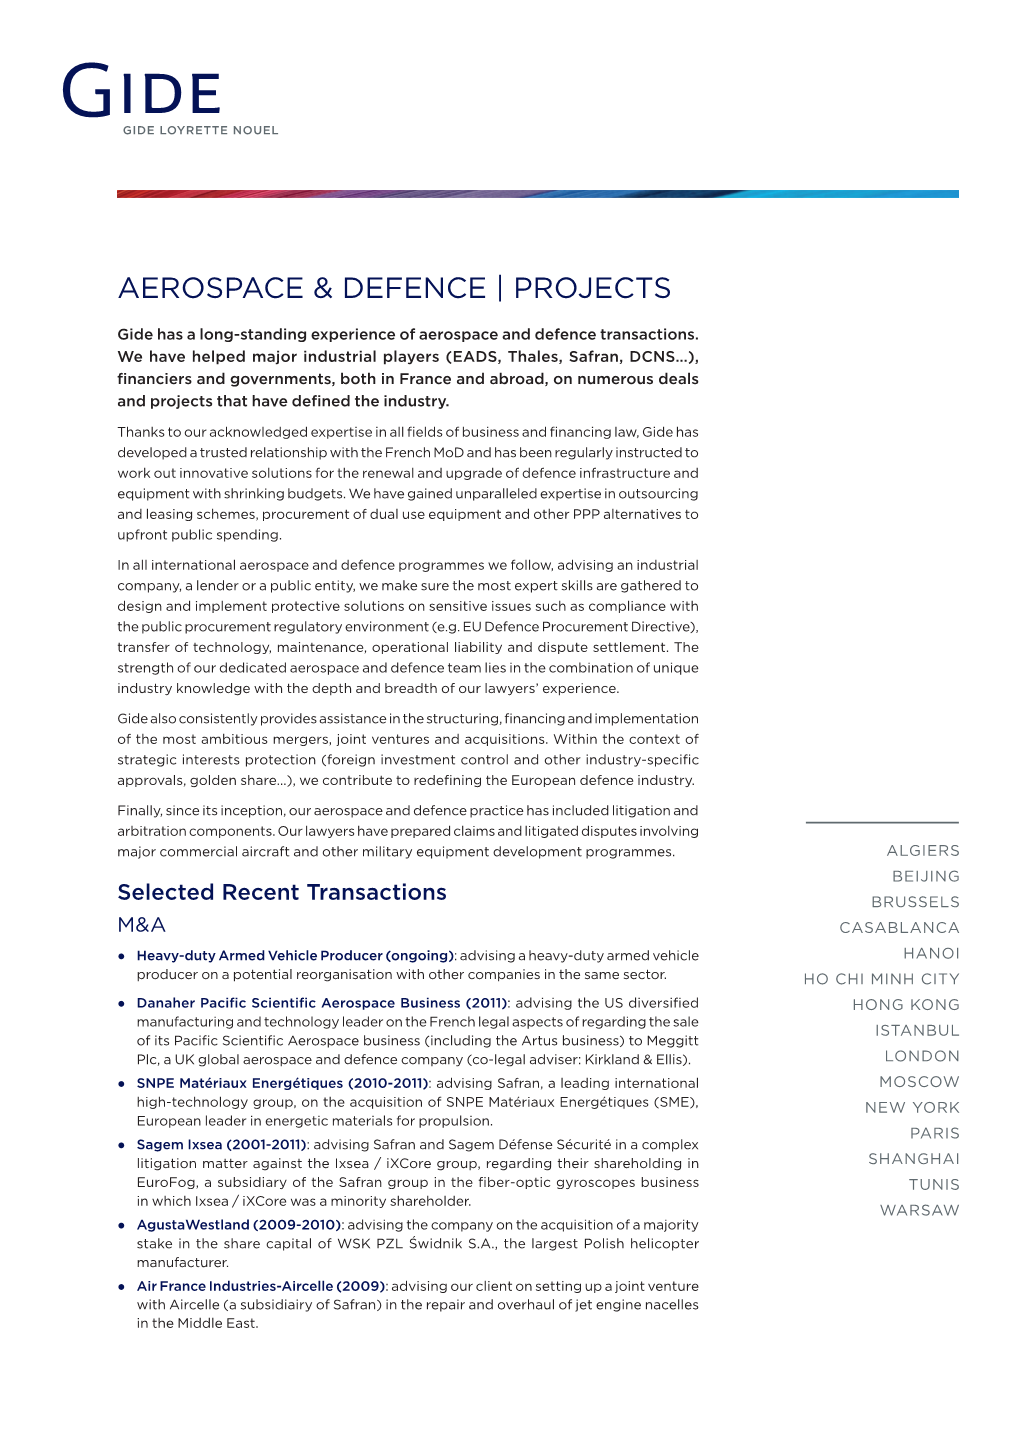 Aerospace & Defence | Projects